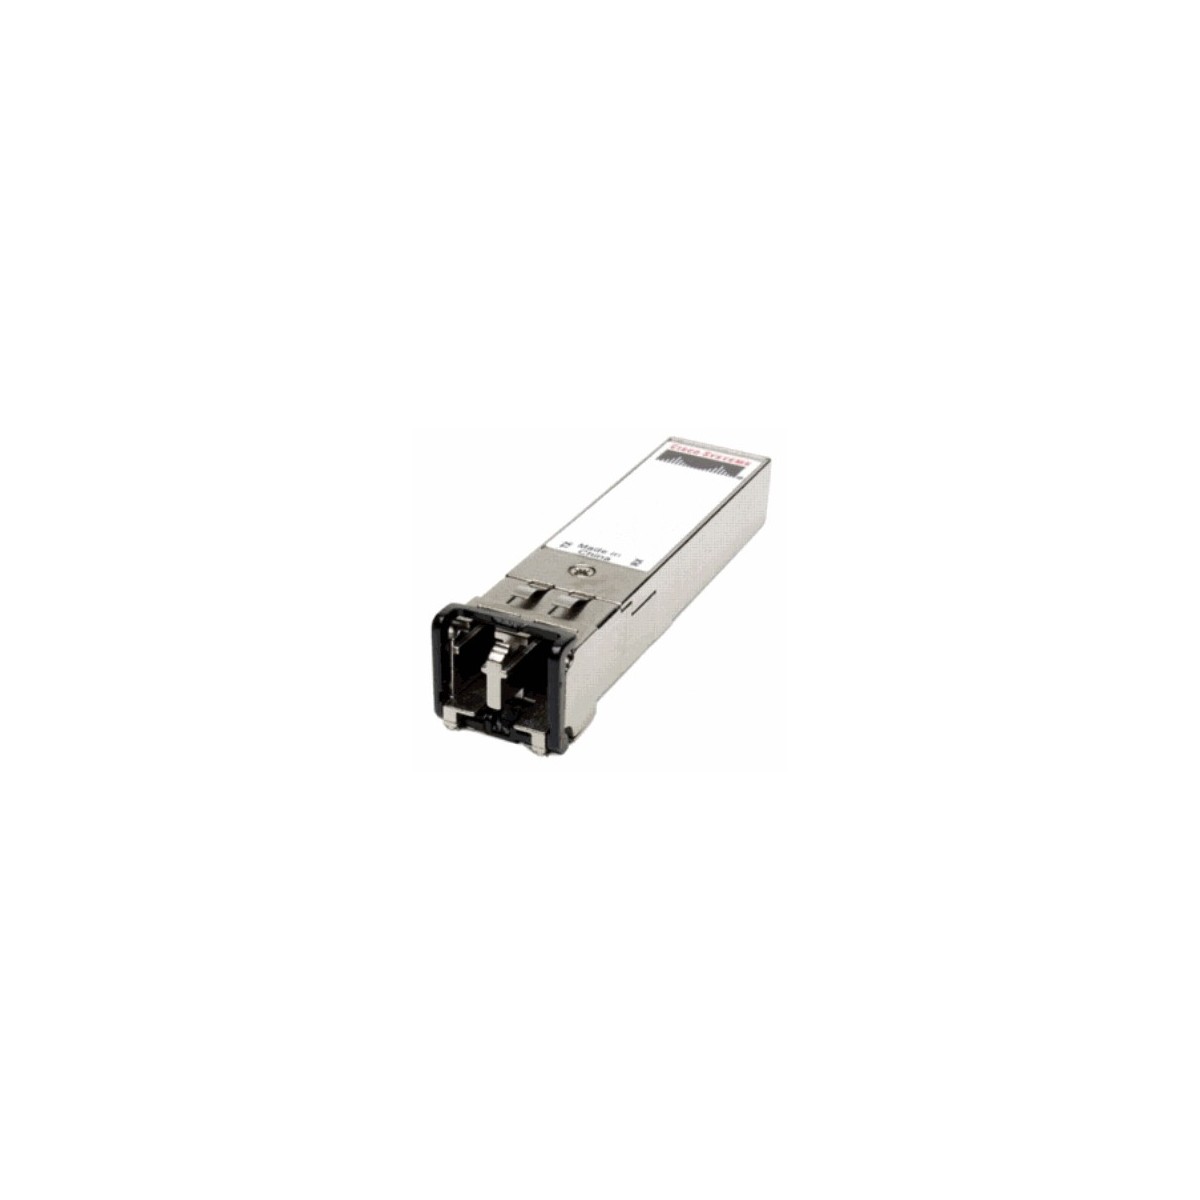 Cisco 1000BASE-ZX SFP transceiver module for SMF - 1000 Mbit/s - 1000BASE-ZX - Wired - 70000 m - 1550 nm - IEEE 802.3z - IEEE 80